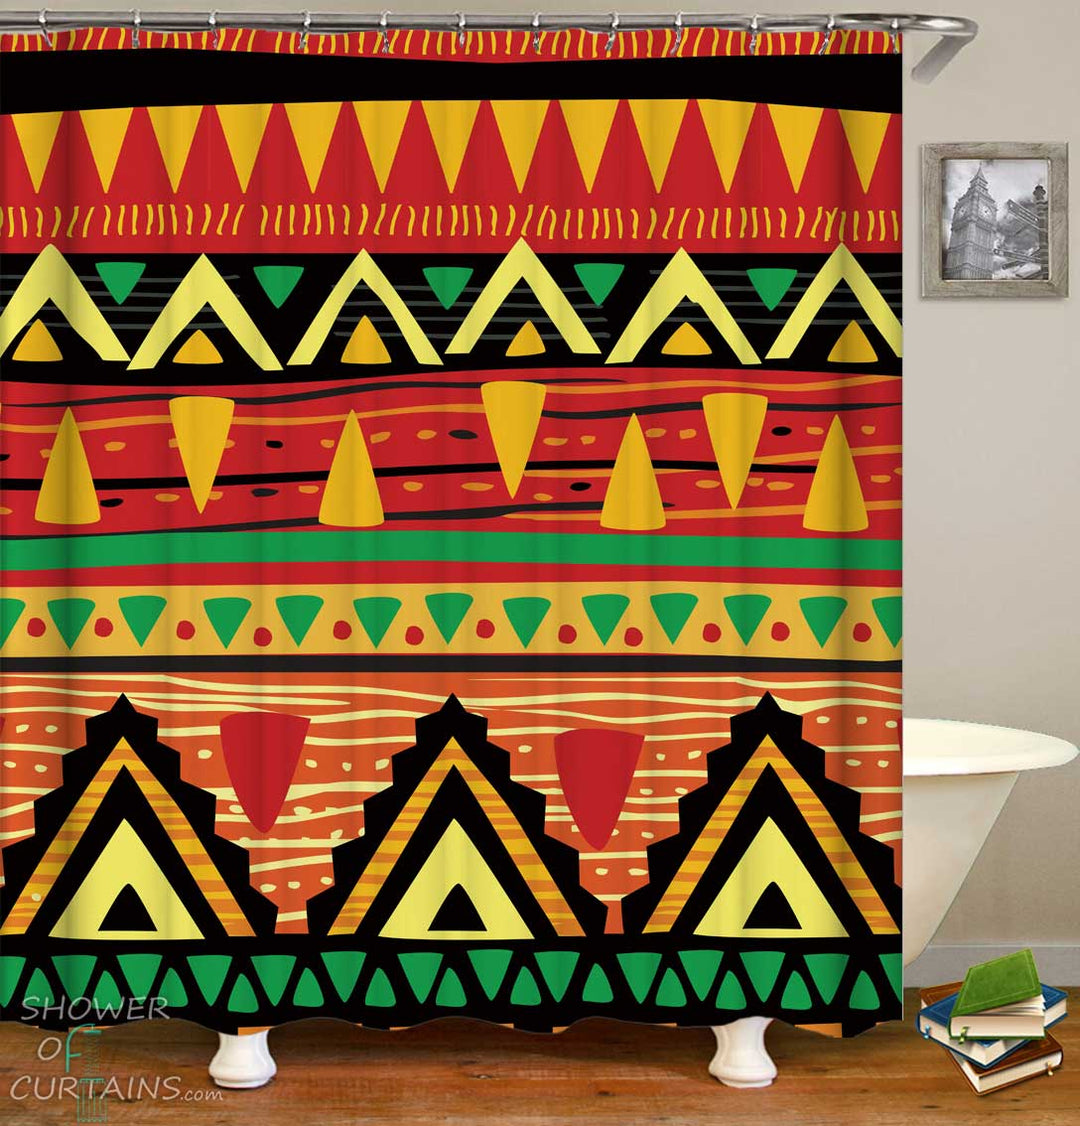 Shower Curtains with Multi Colored African Design